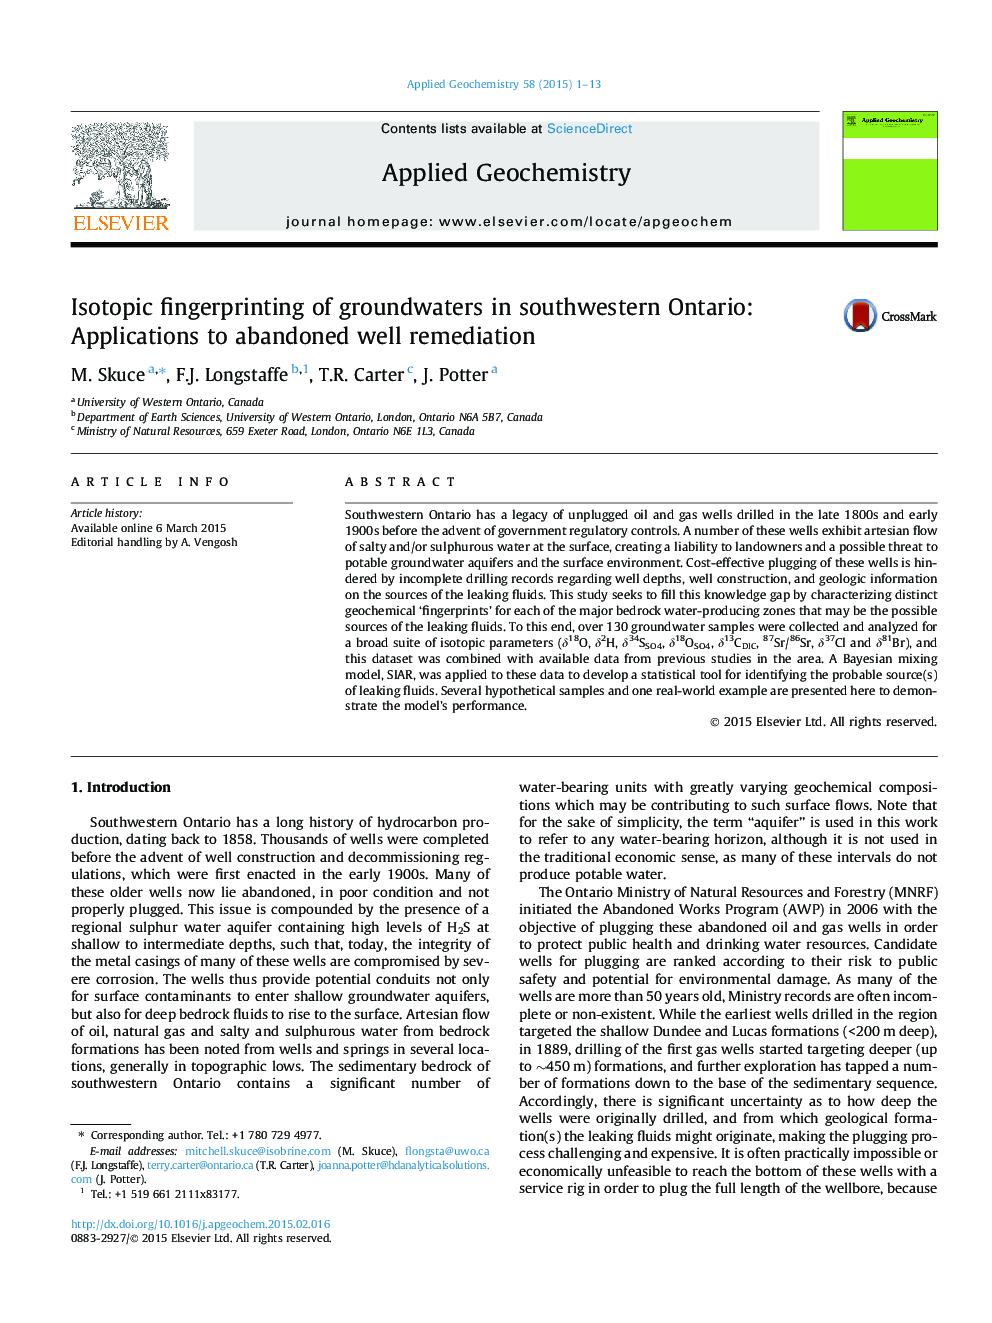 Isotopic fingerprinting of groundwaters in southwestern Ontario: Applications to abandoned well remediation